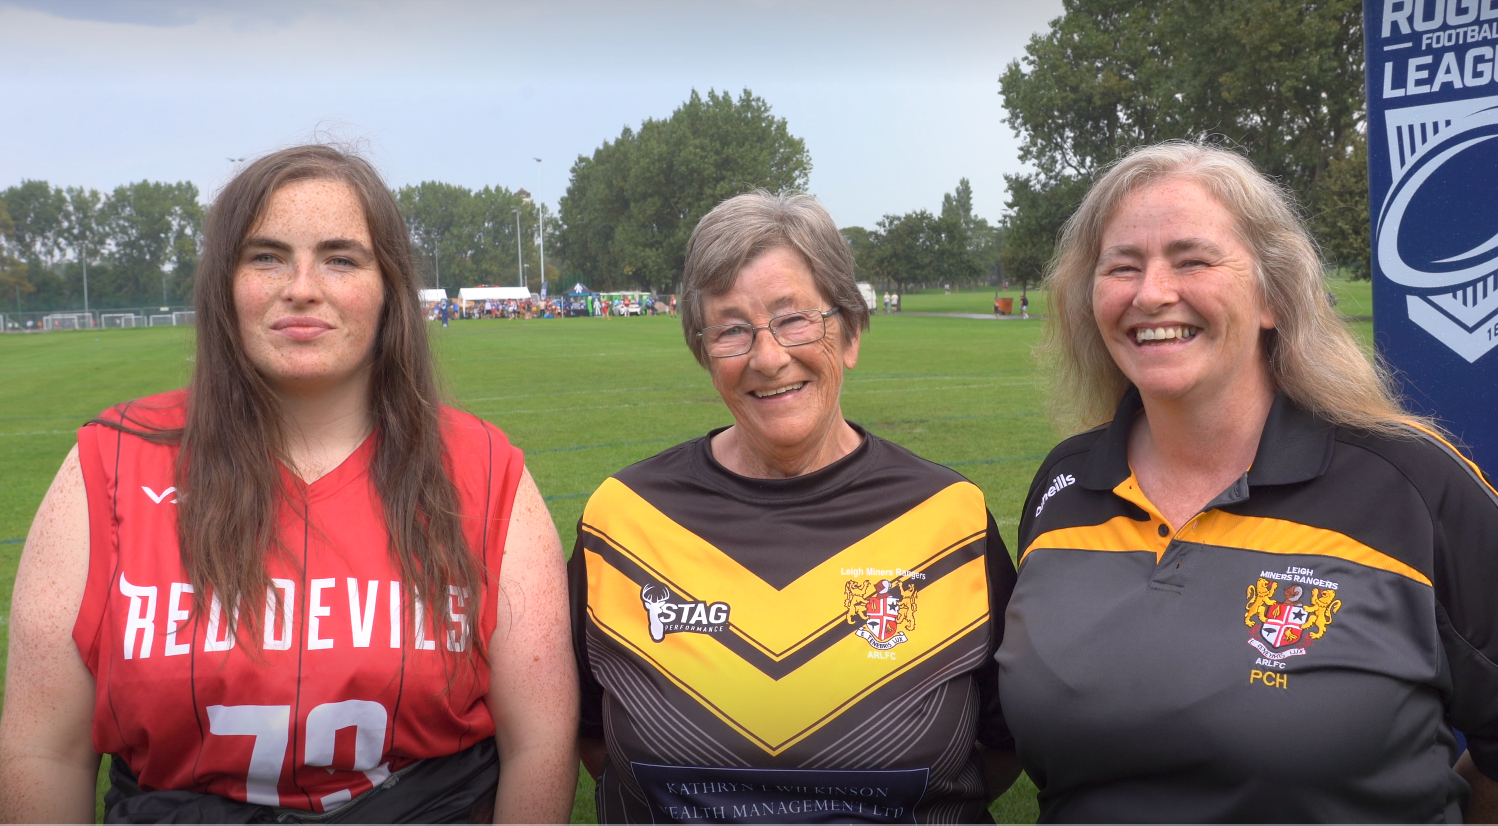 Mum, daughter and grandma playing rugby league together